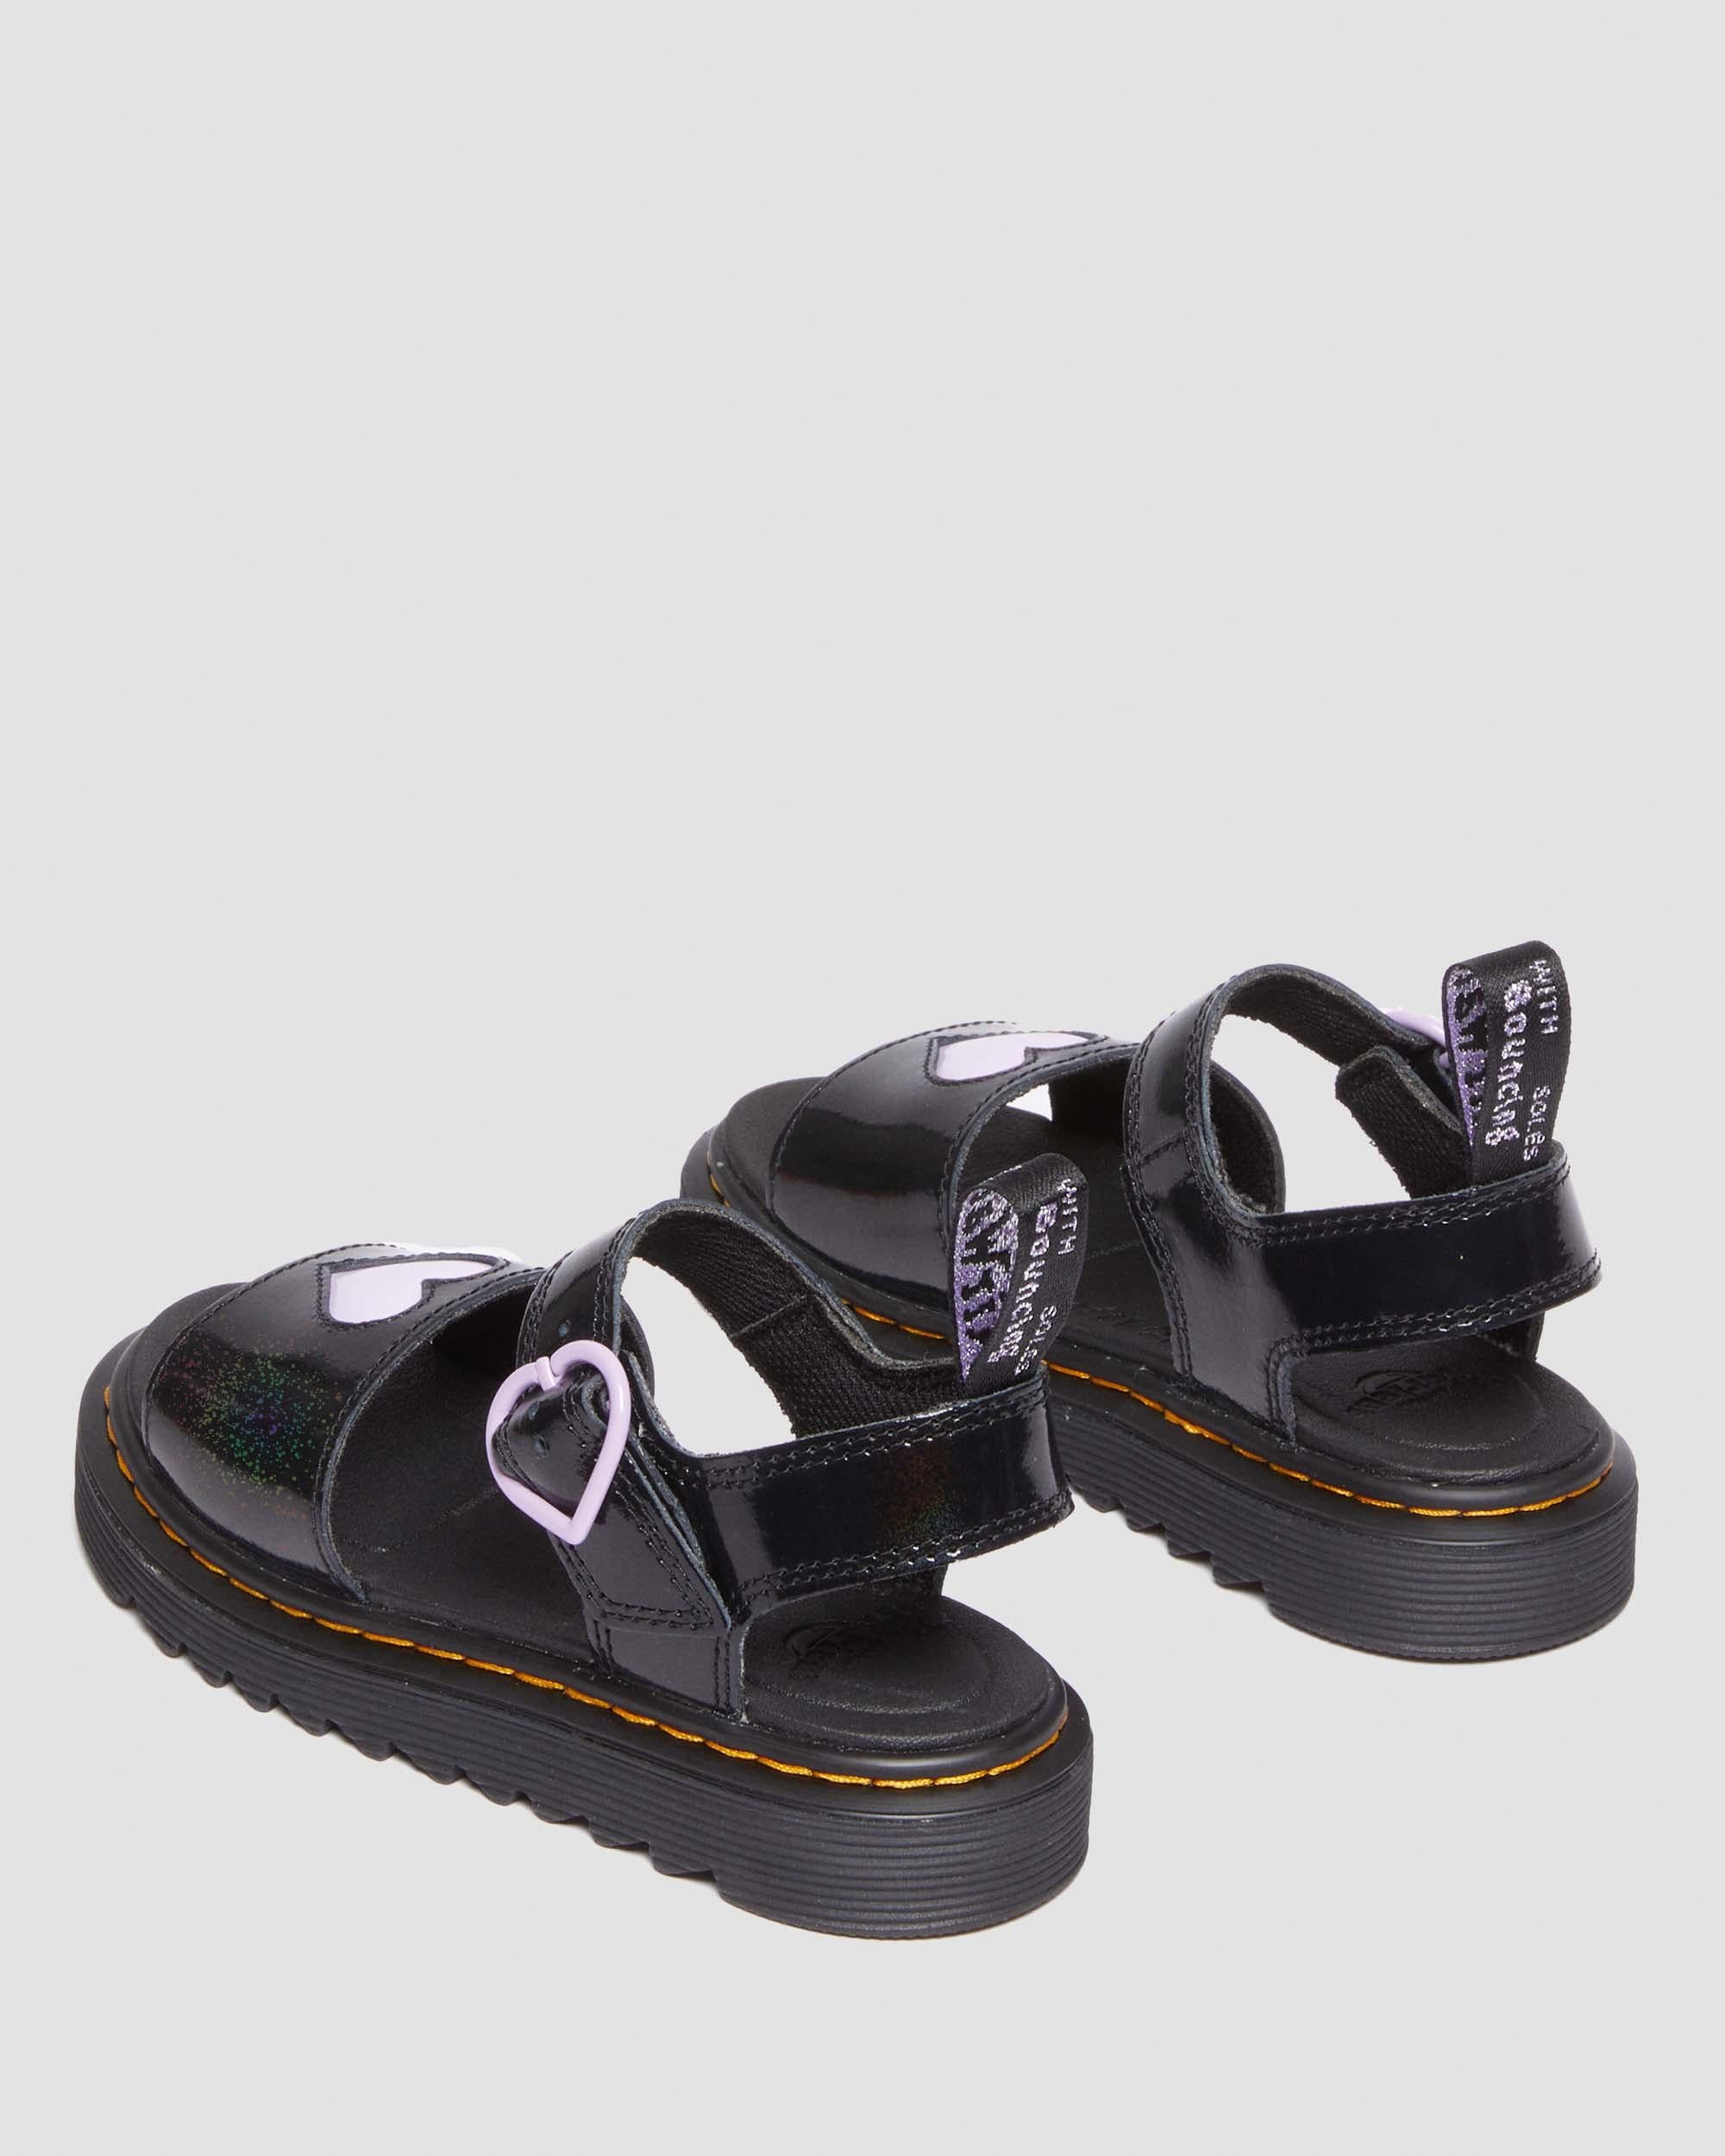 Marlowe Hearts Galaxy Shimmer Junior Leather Sandals